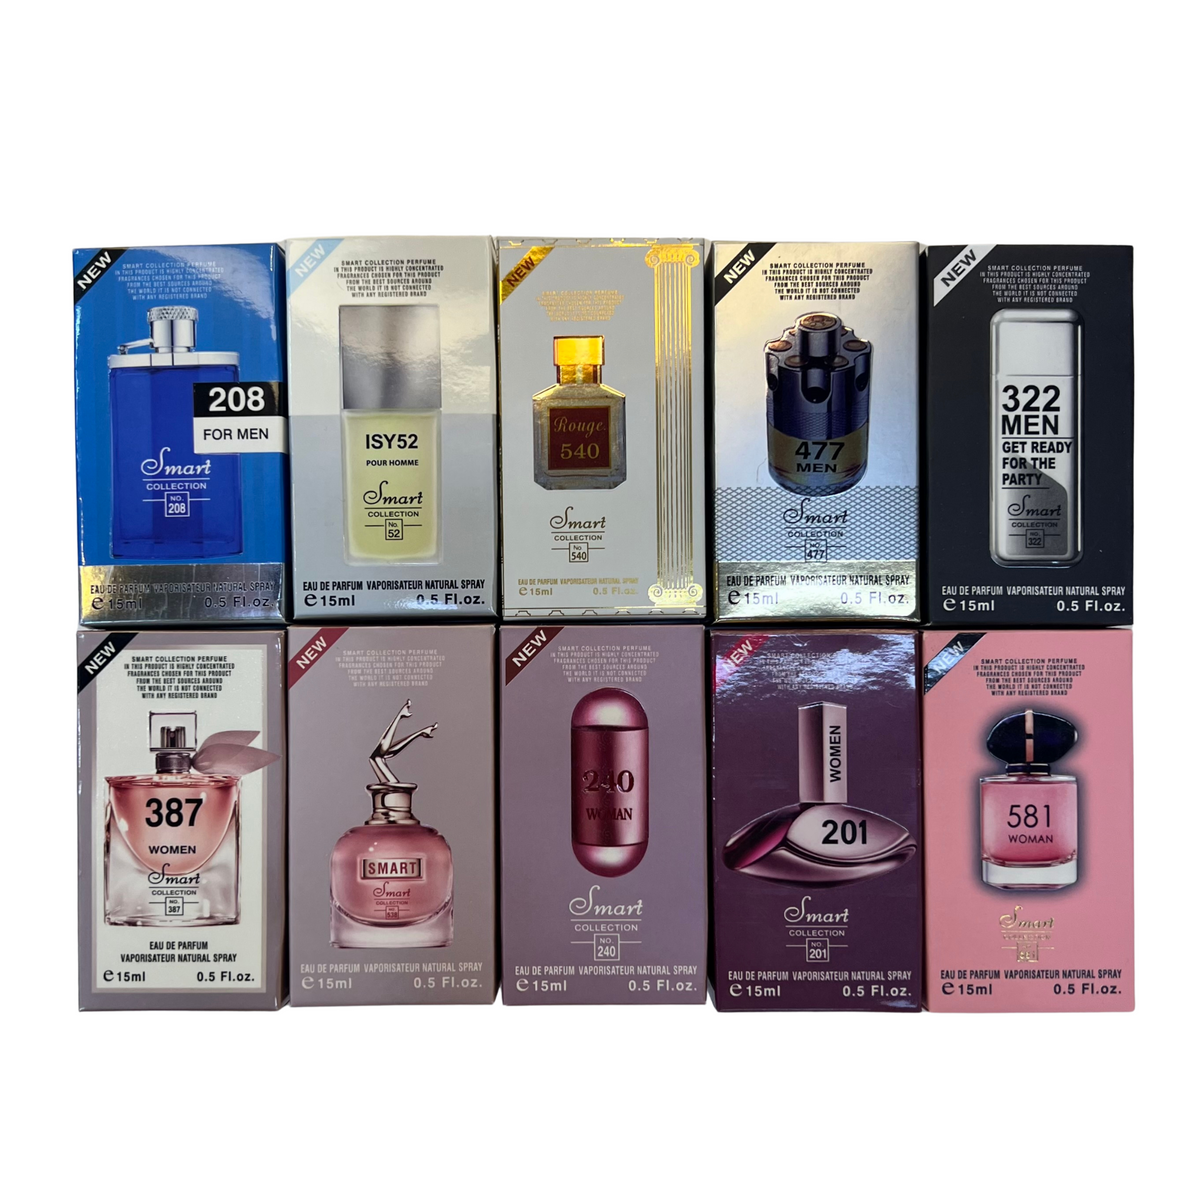 15ML Perfume bottles, 10 pieces in a combo set, 5 for men and 5 for Womens.